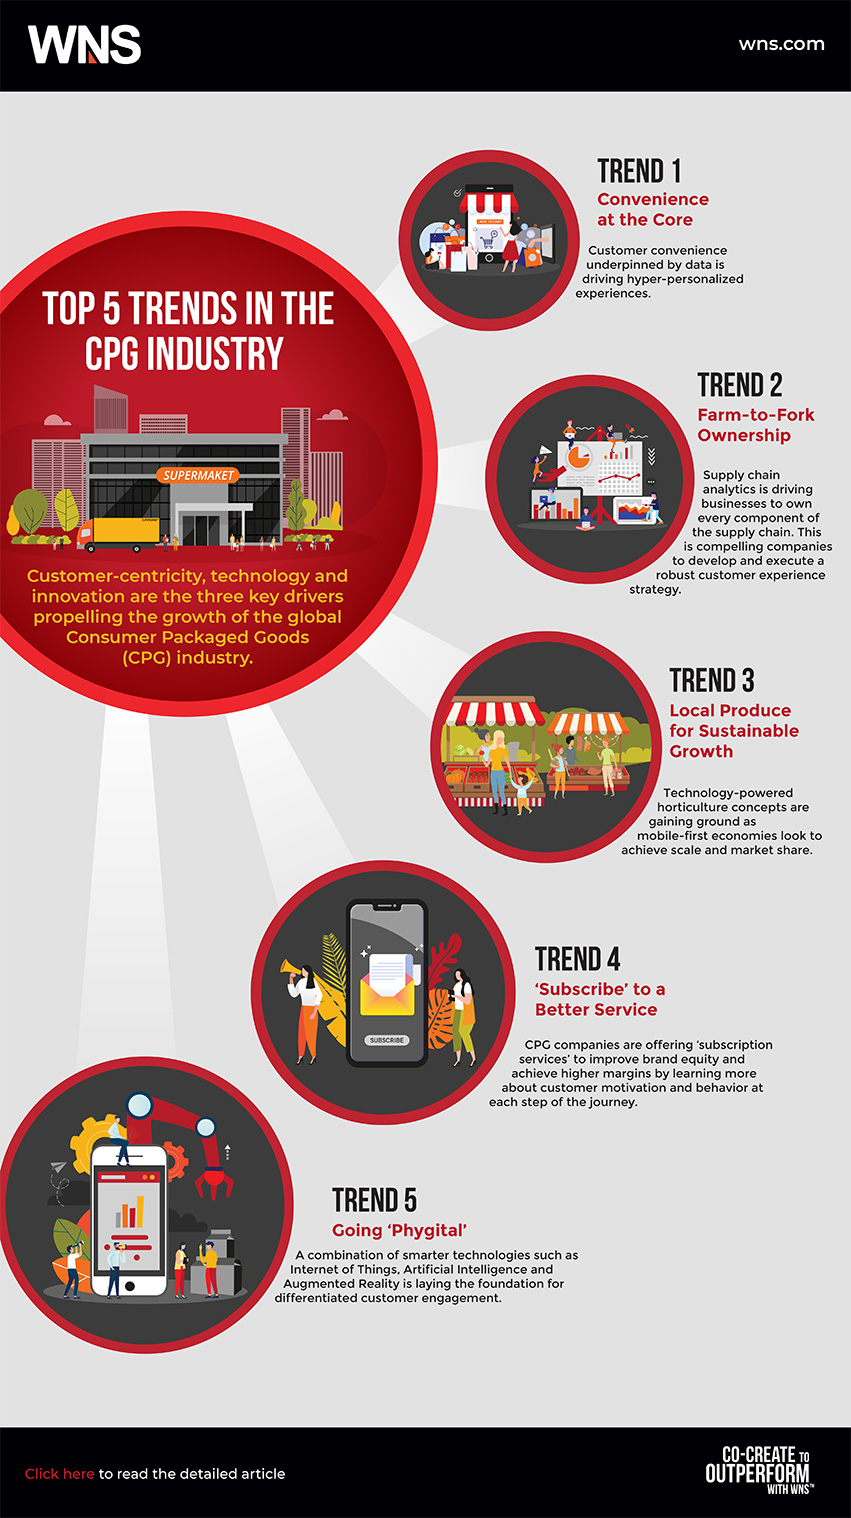 Top 5 Trends in the CPG Industry